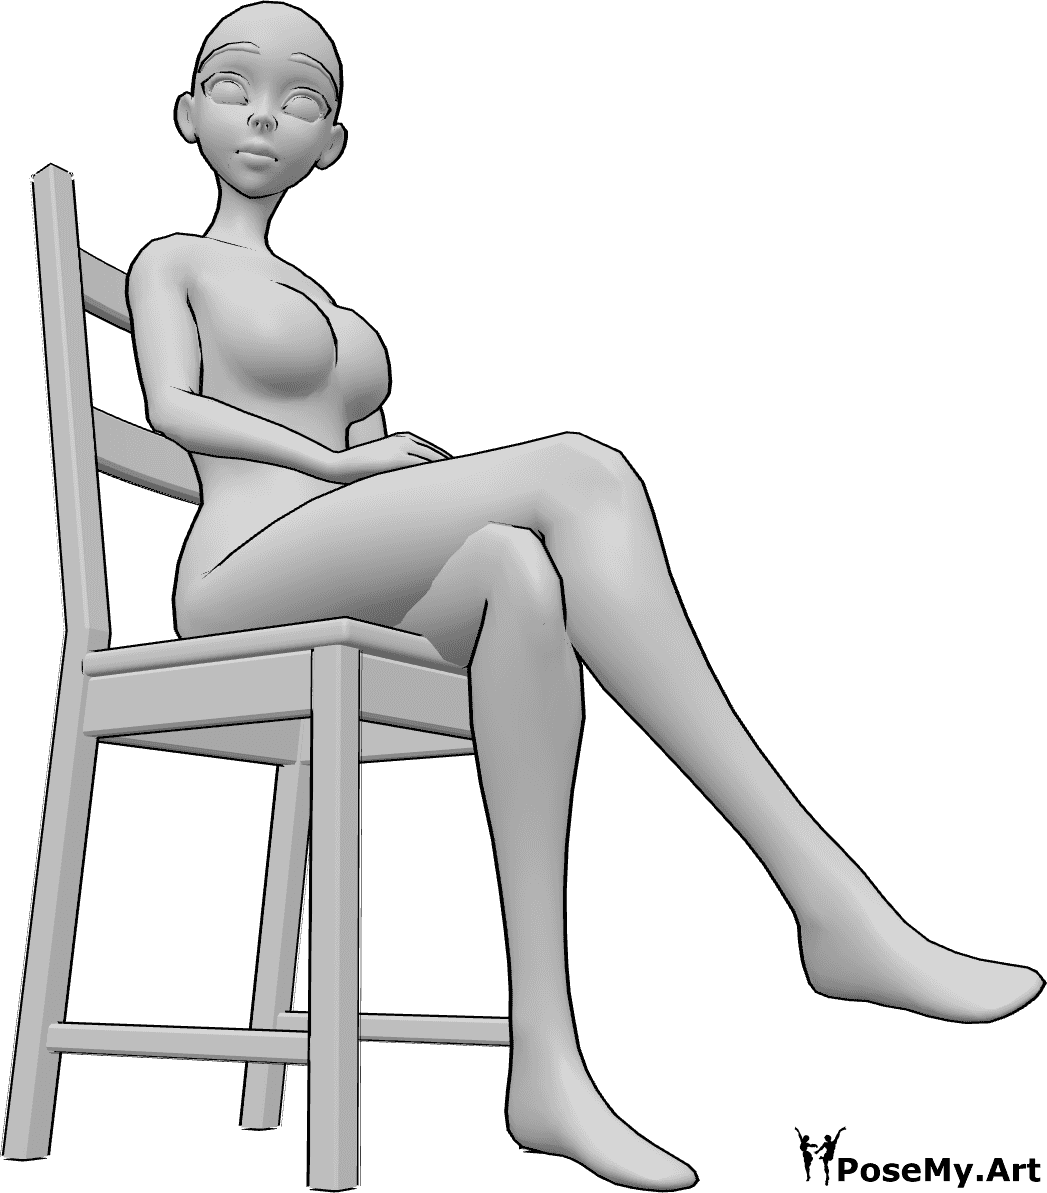 Pose Reference for Artists - Female - Sitting Artists: Feel free to use our  poses to create your own art, without worry. Our poses are 'free to use' if  you are making